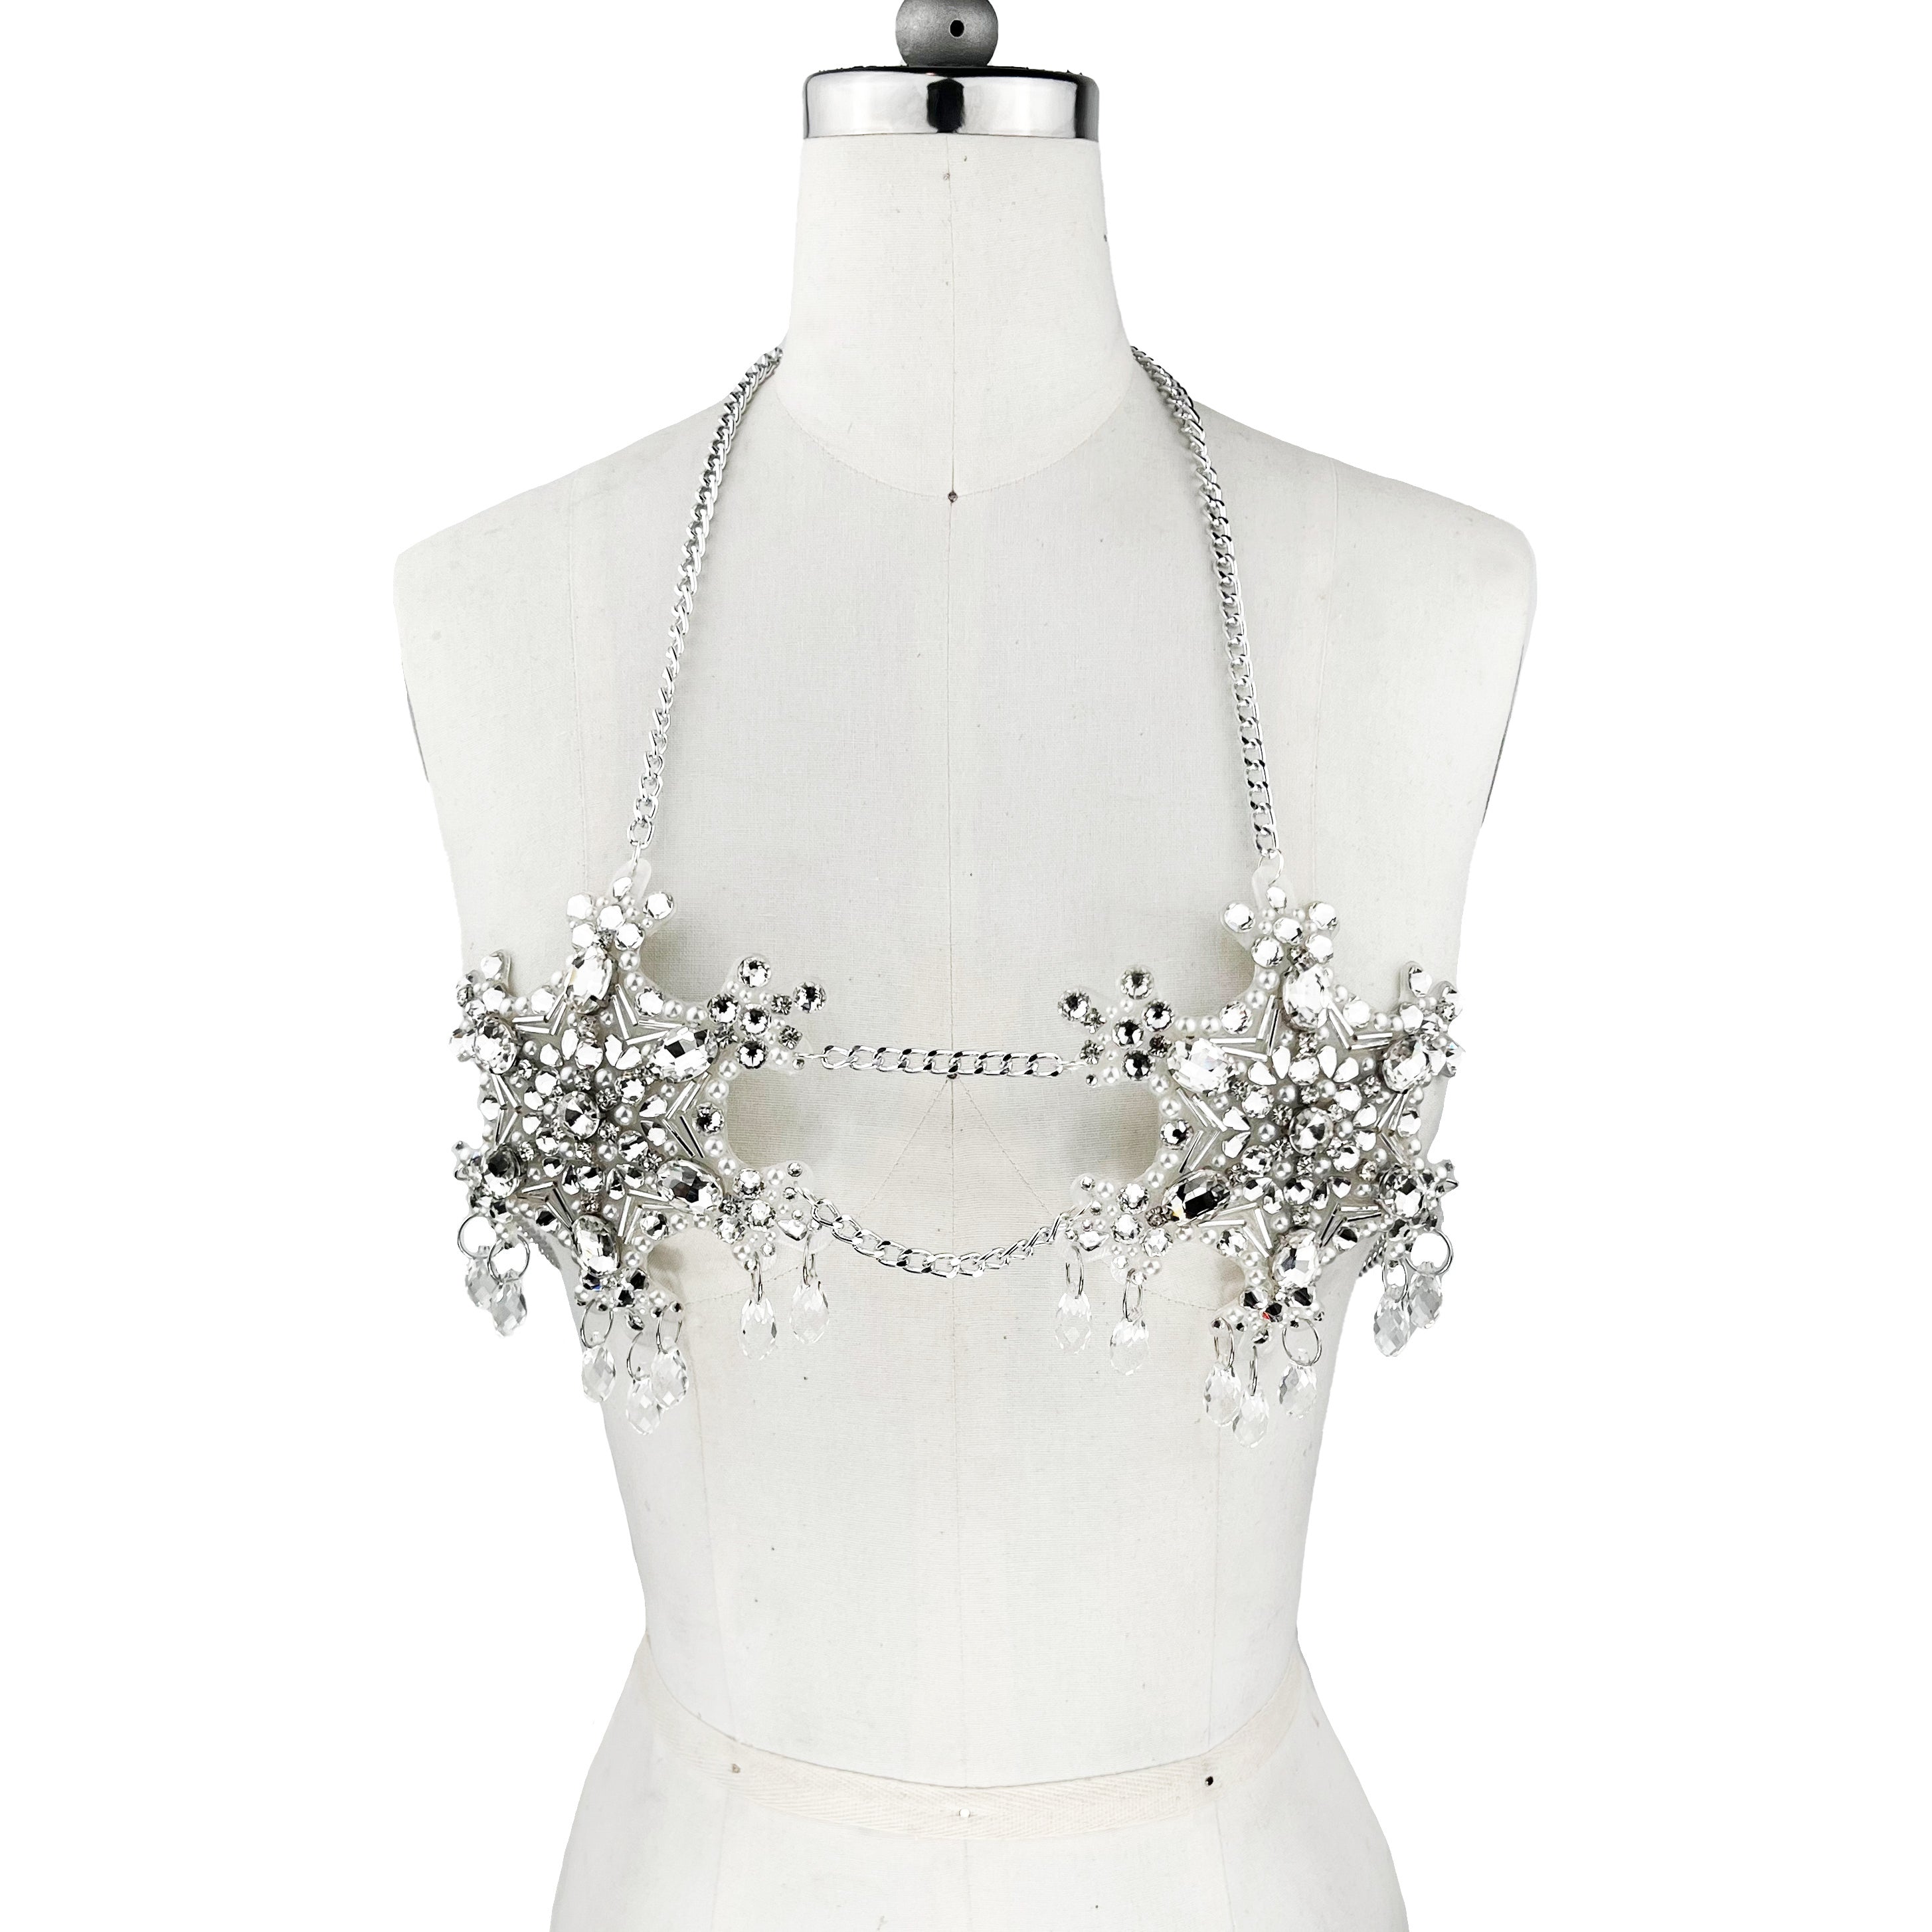 bespoke, one of a kind, crystal pearl and chain, 3d printed bra with chain straps and dangling crystals front view